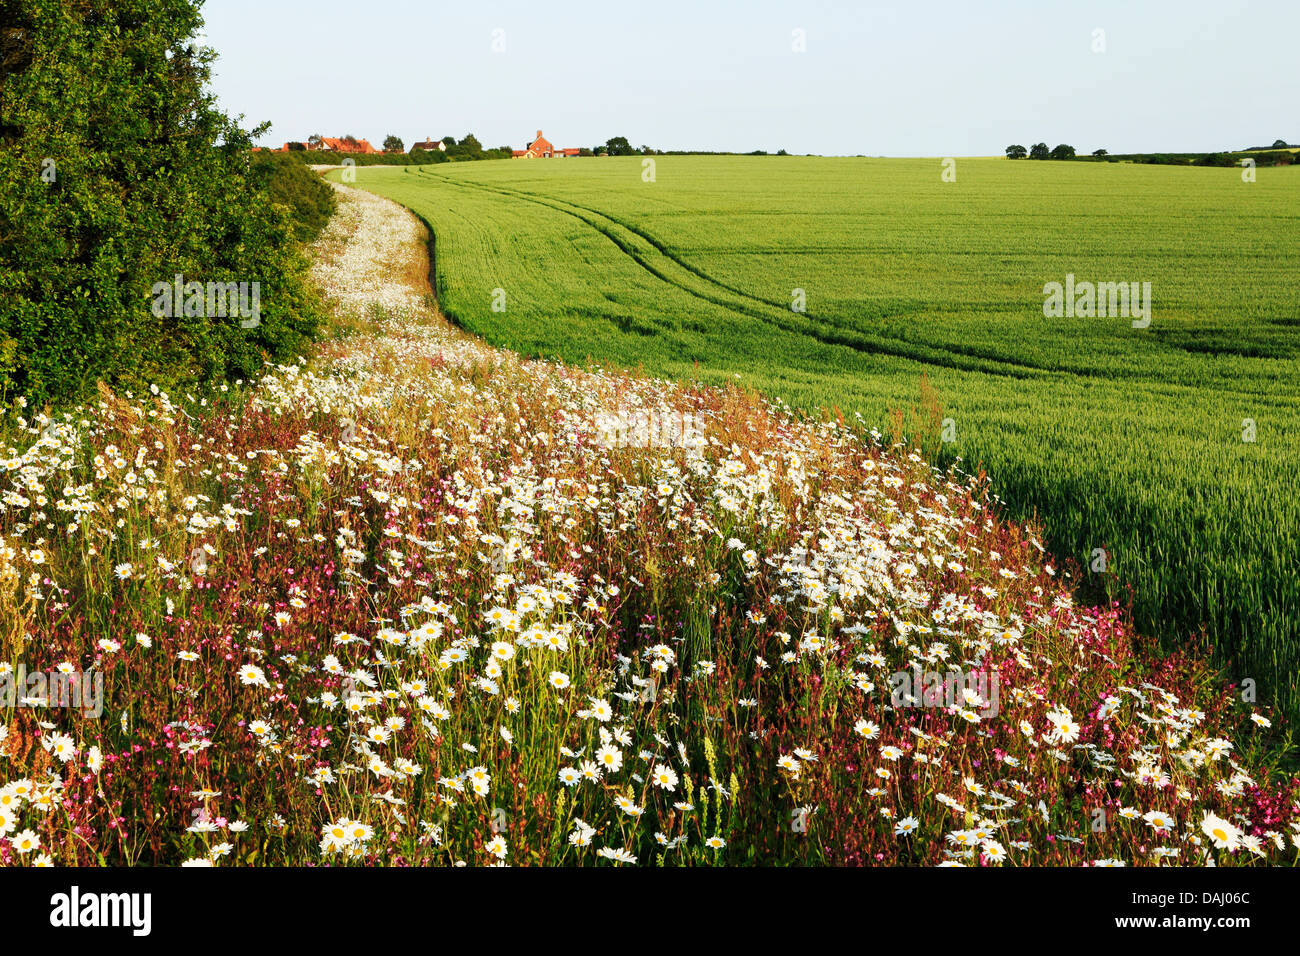 Agricultural field grain crop with Wild Flower border crops flowers Stock Photo